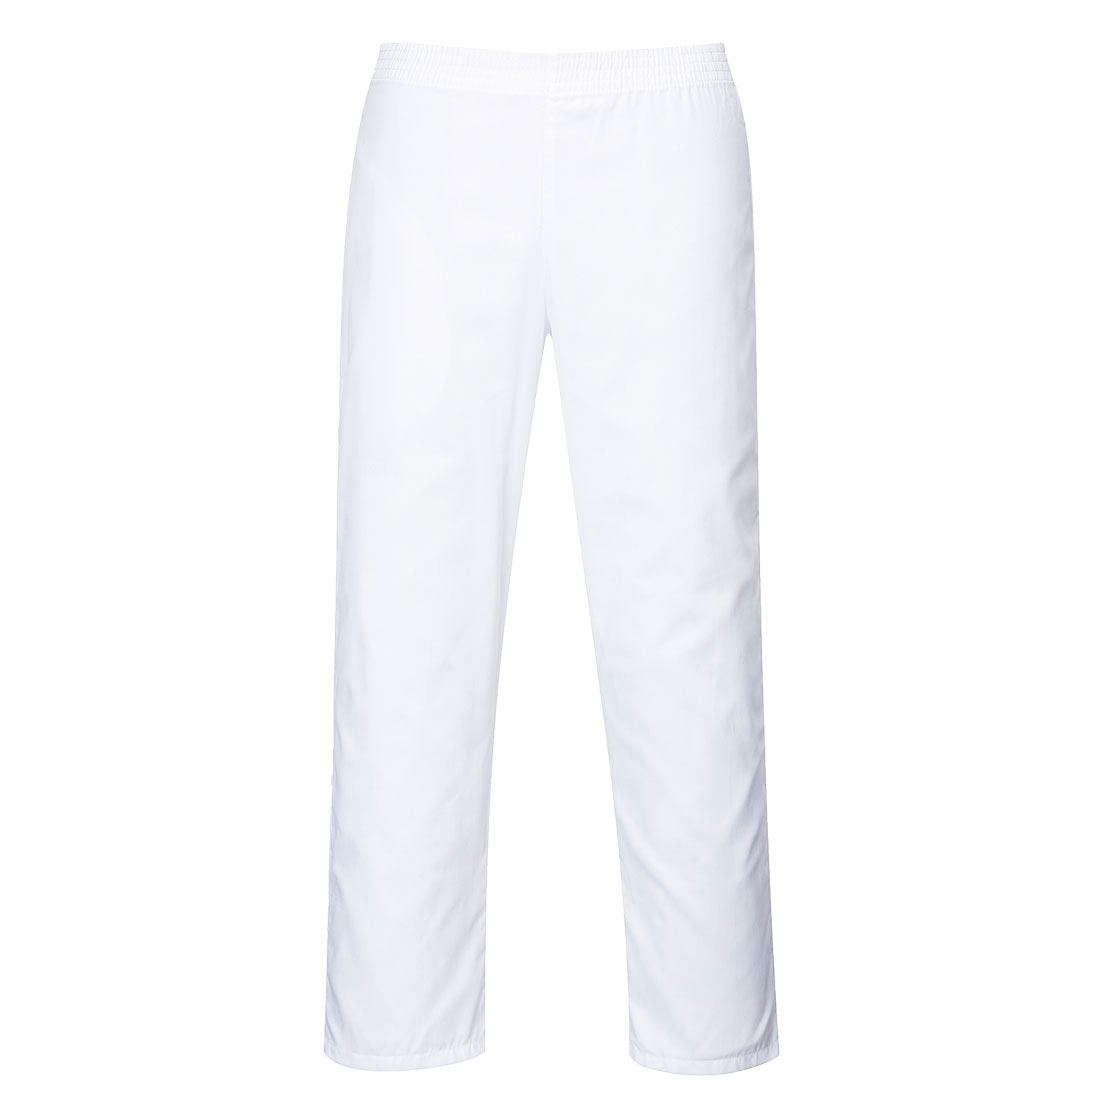 Bakers Trousers White 4XLR